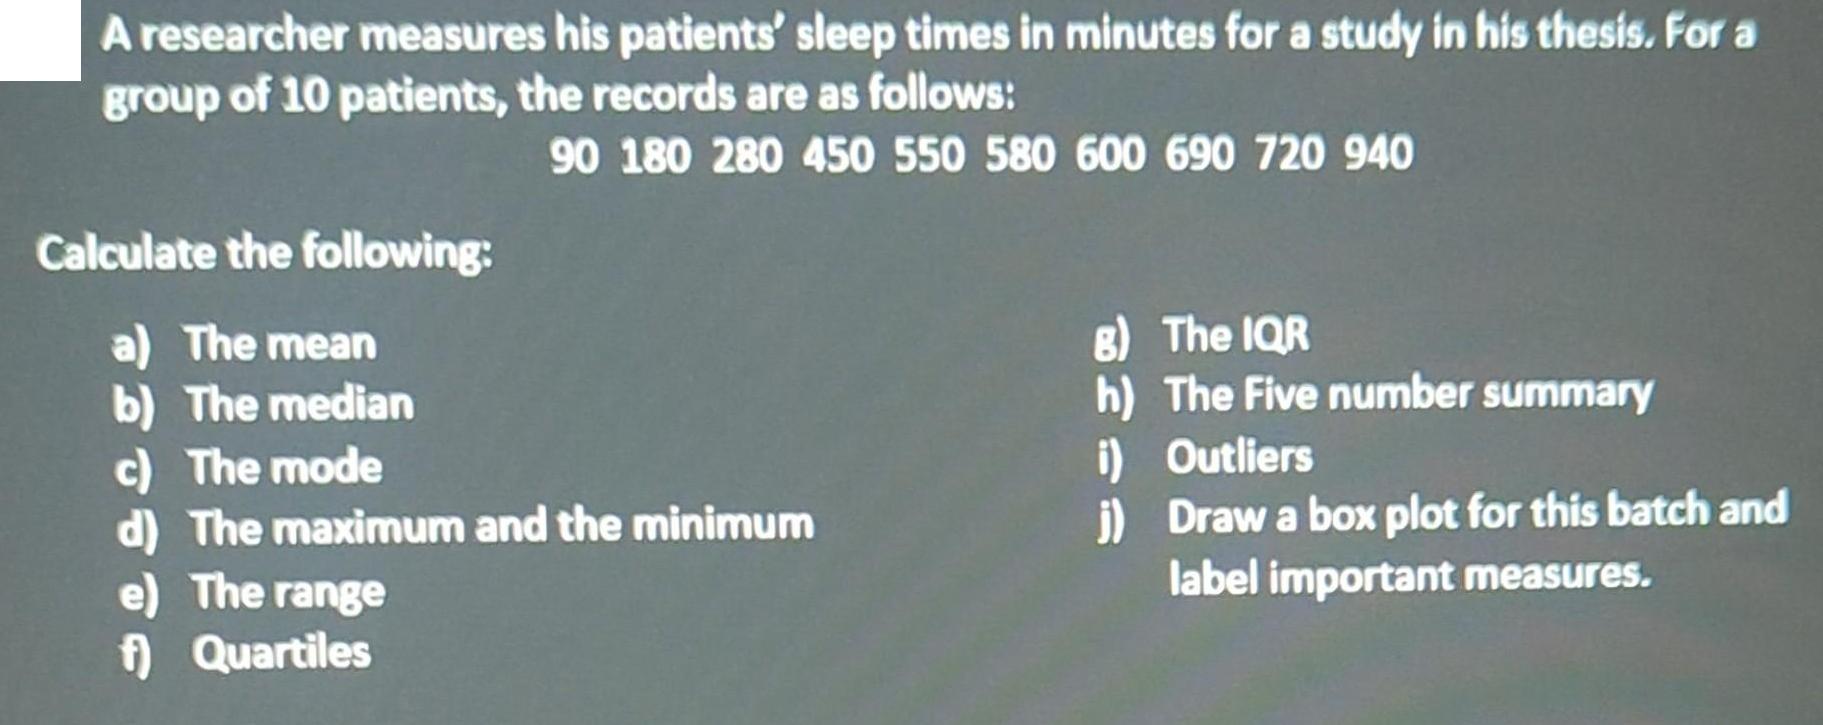 A researcher measures his patients' sleep times in minutes for a study in his thesis. For a group of 10